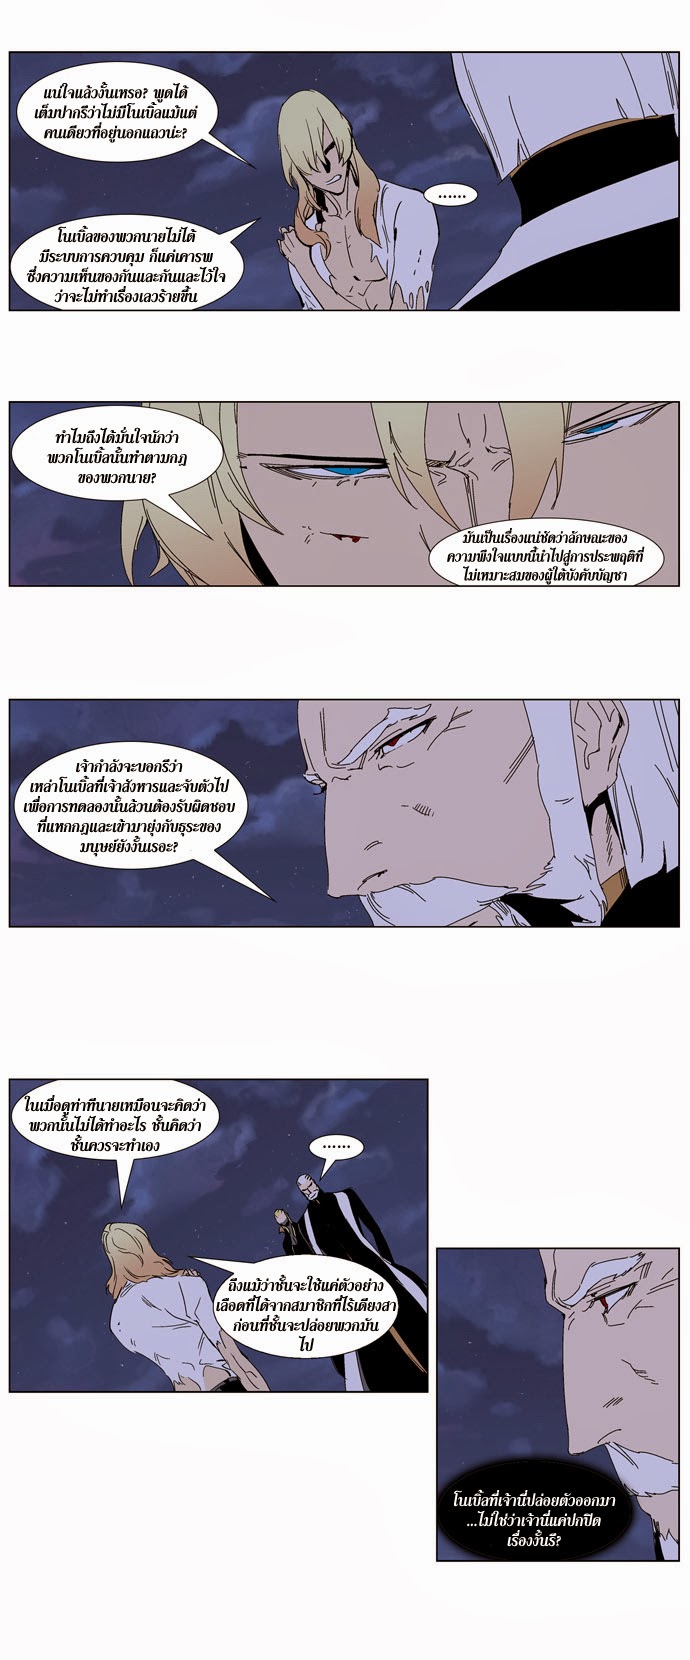 Noblesse 243 015